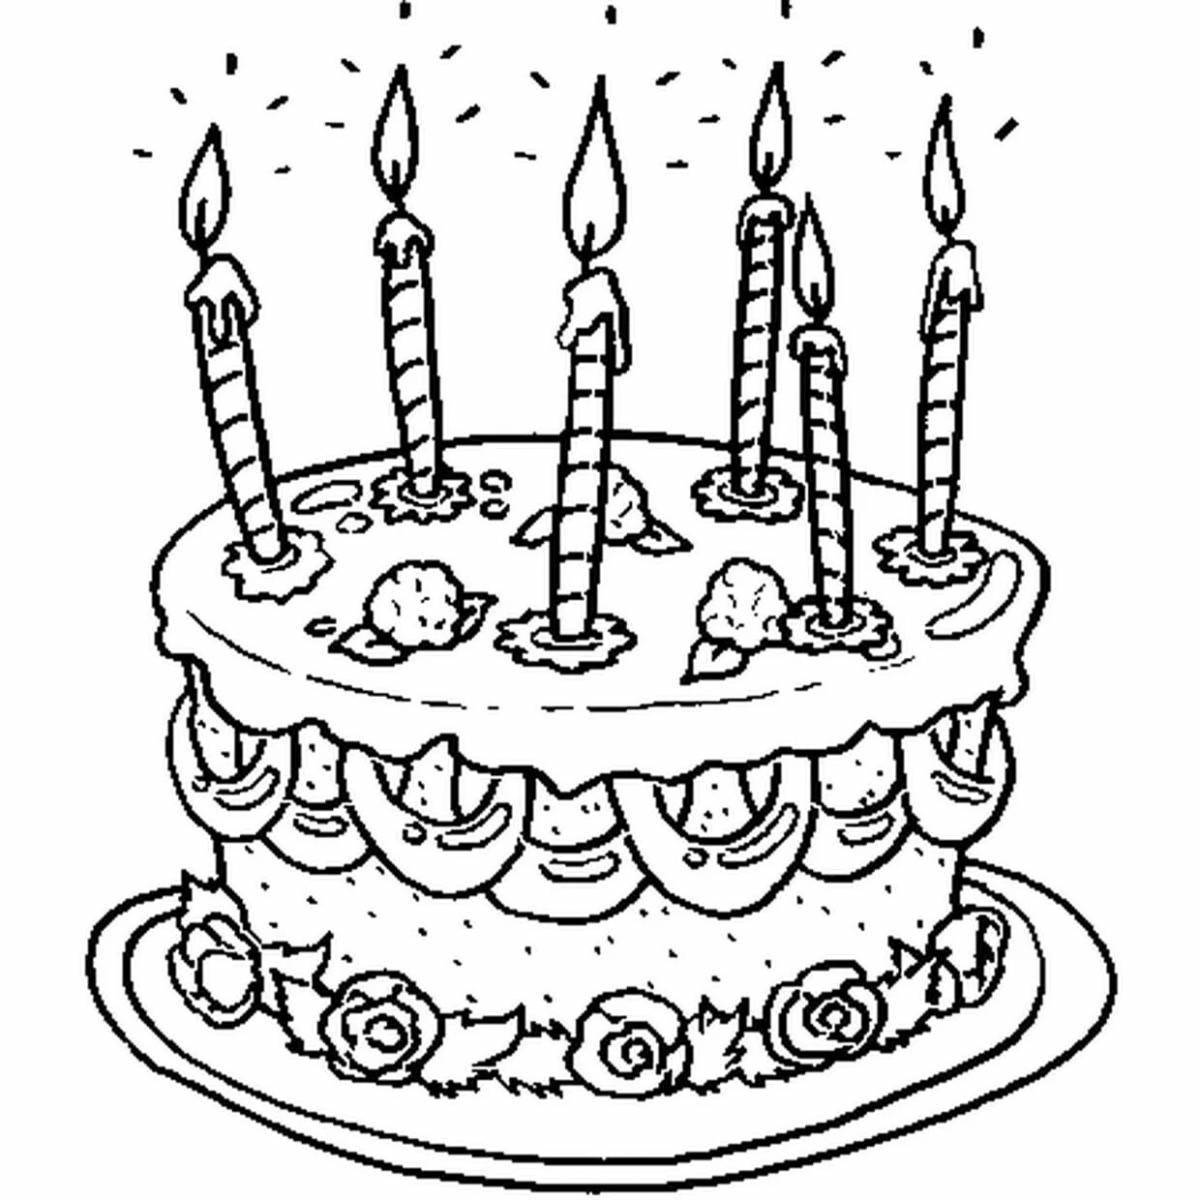 Color-frenzy cakes coloring page для детей 5-6 лет